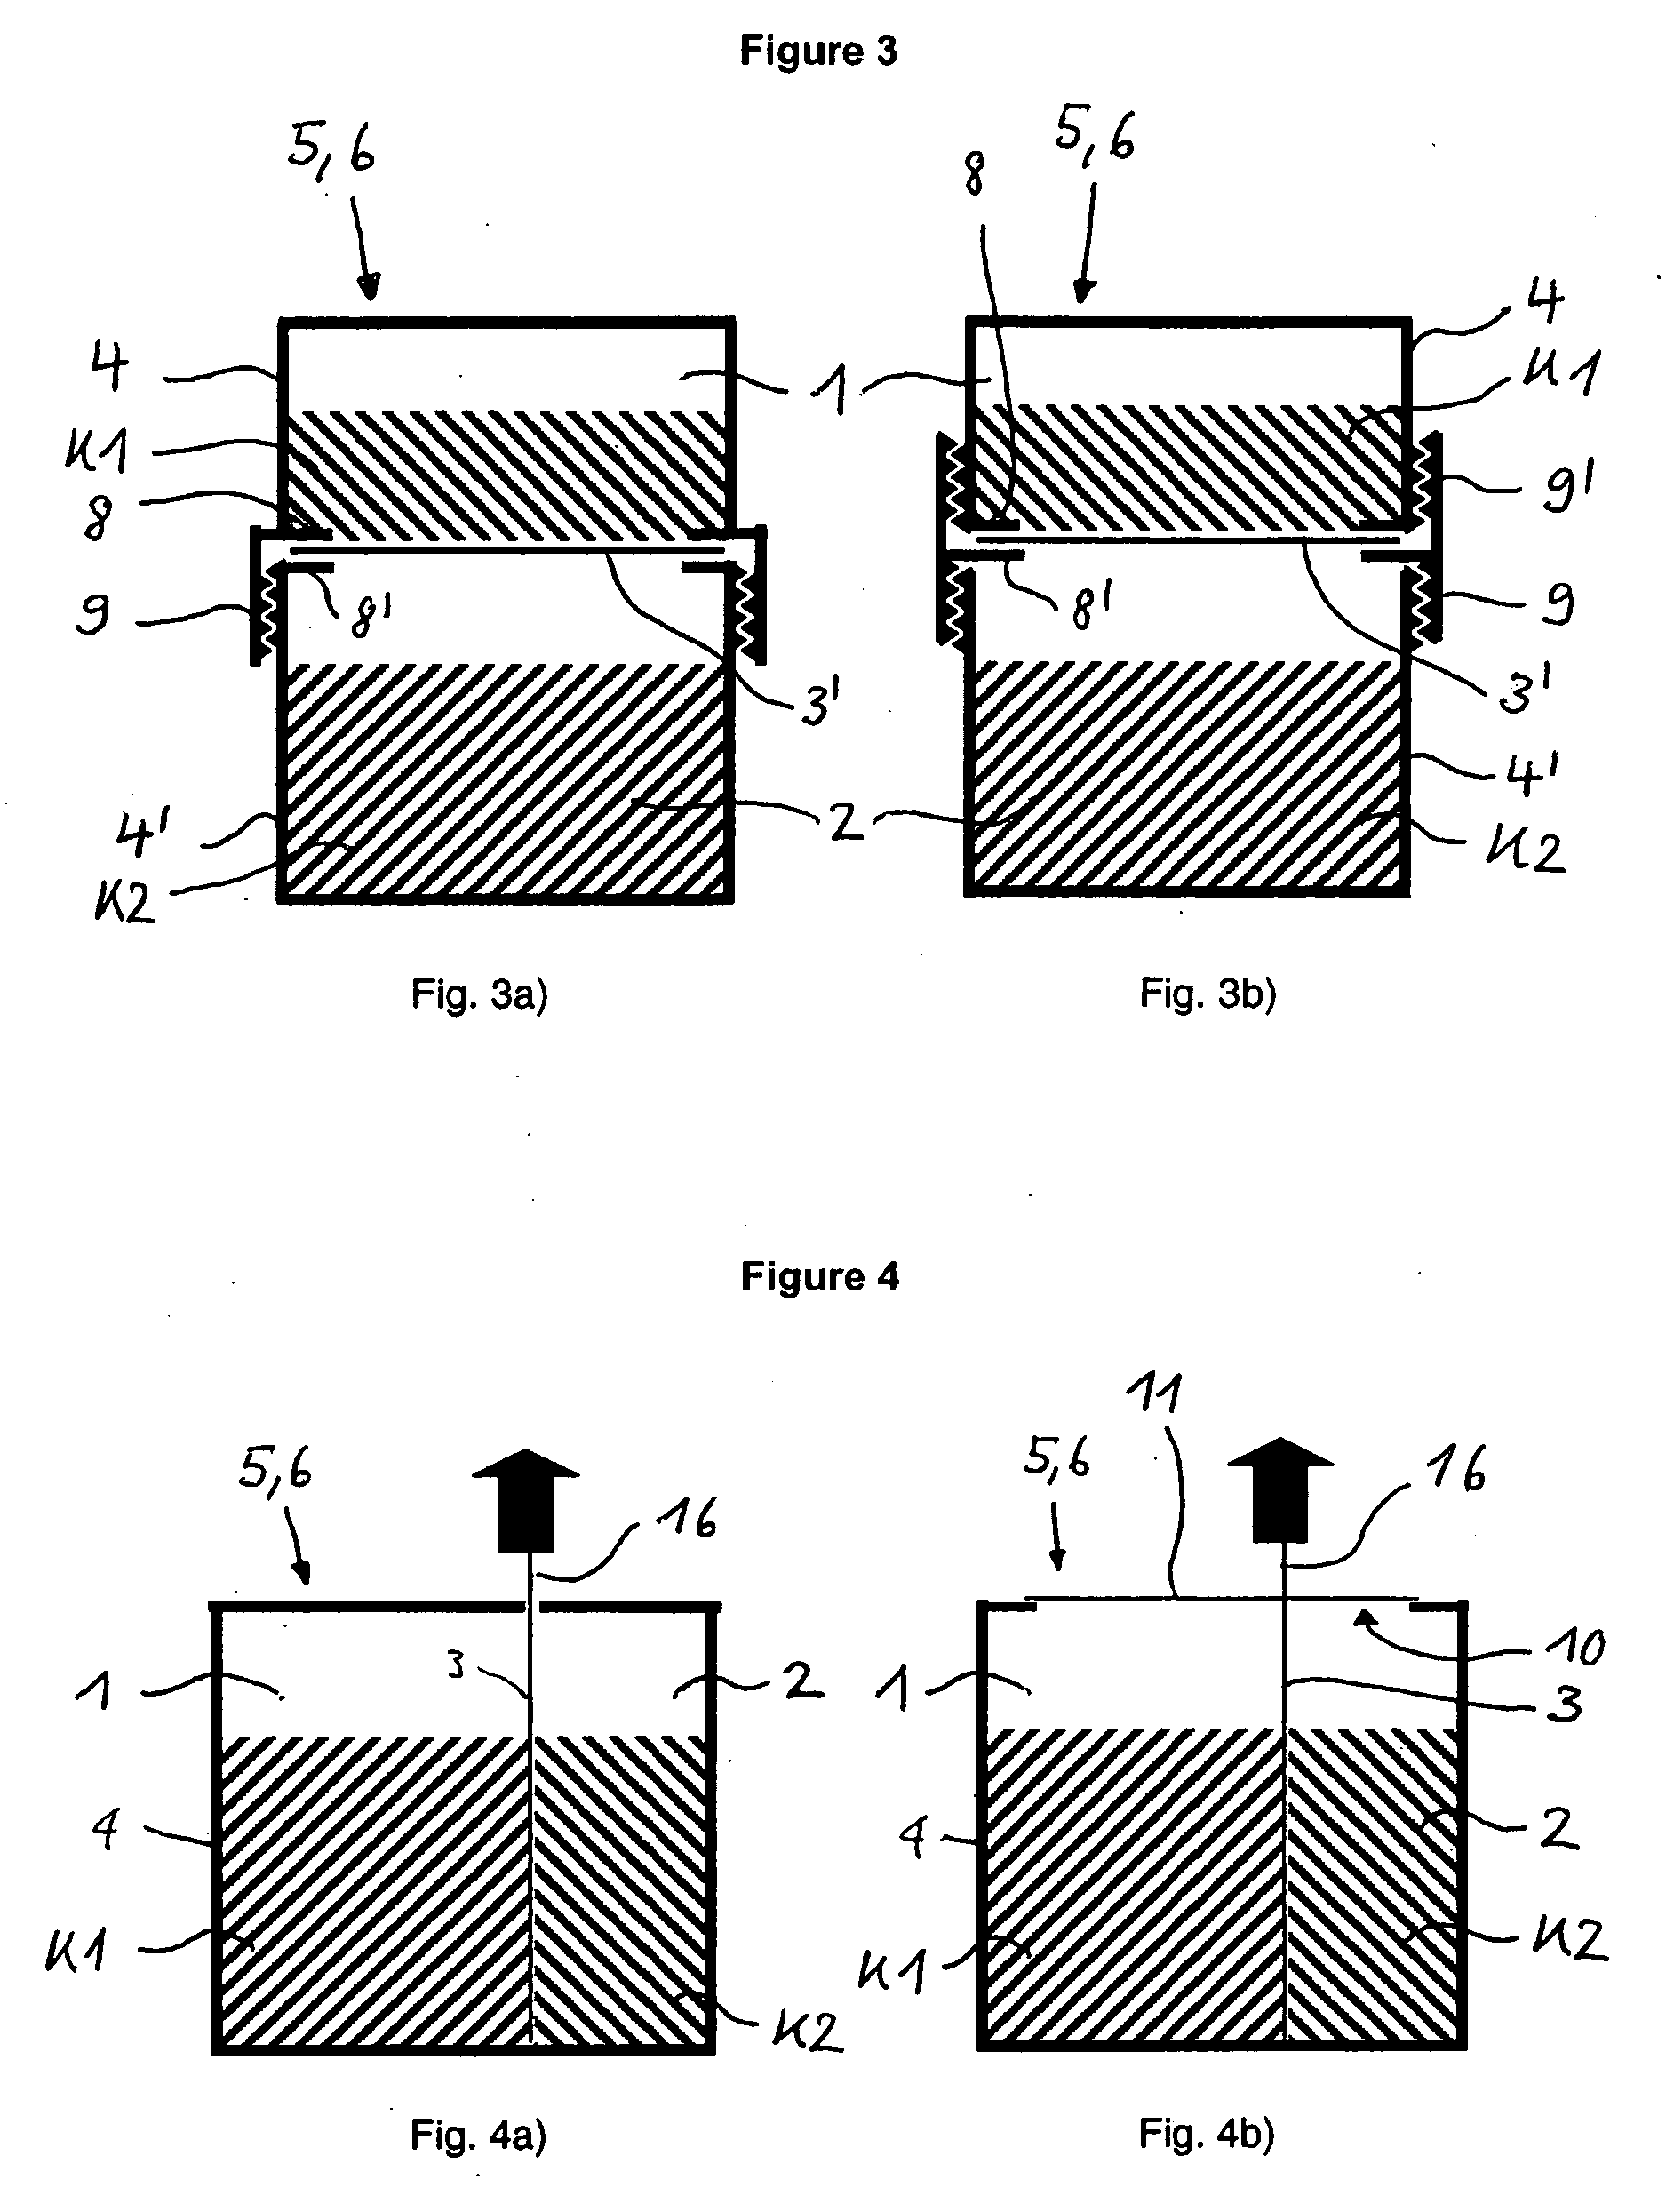 Two-component adhesion promoter composition and use of packaging comprising two compartments